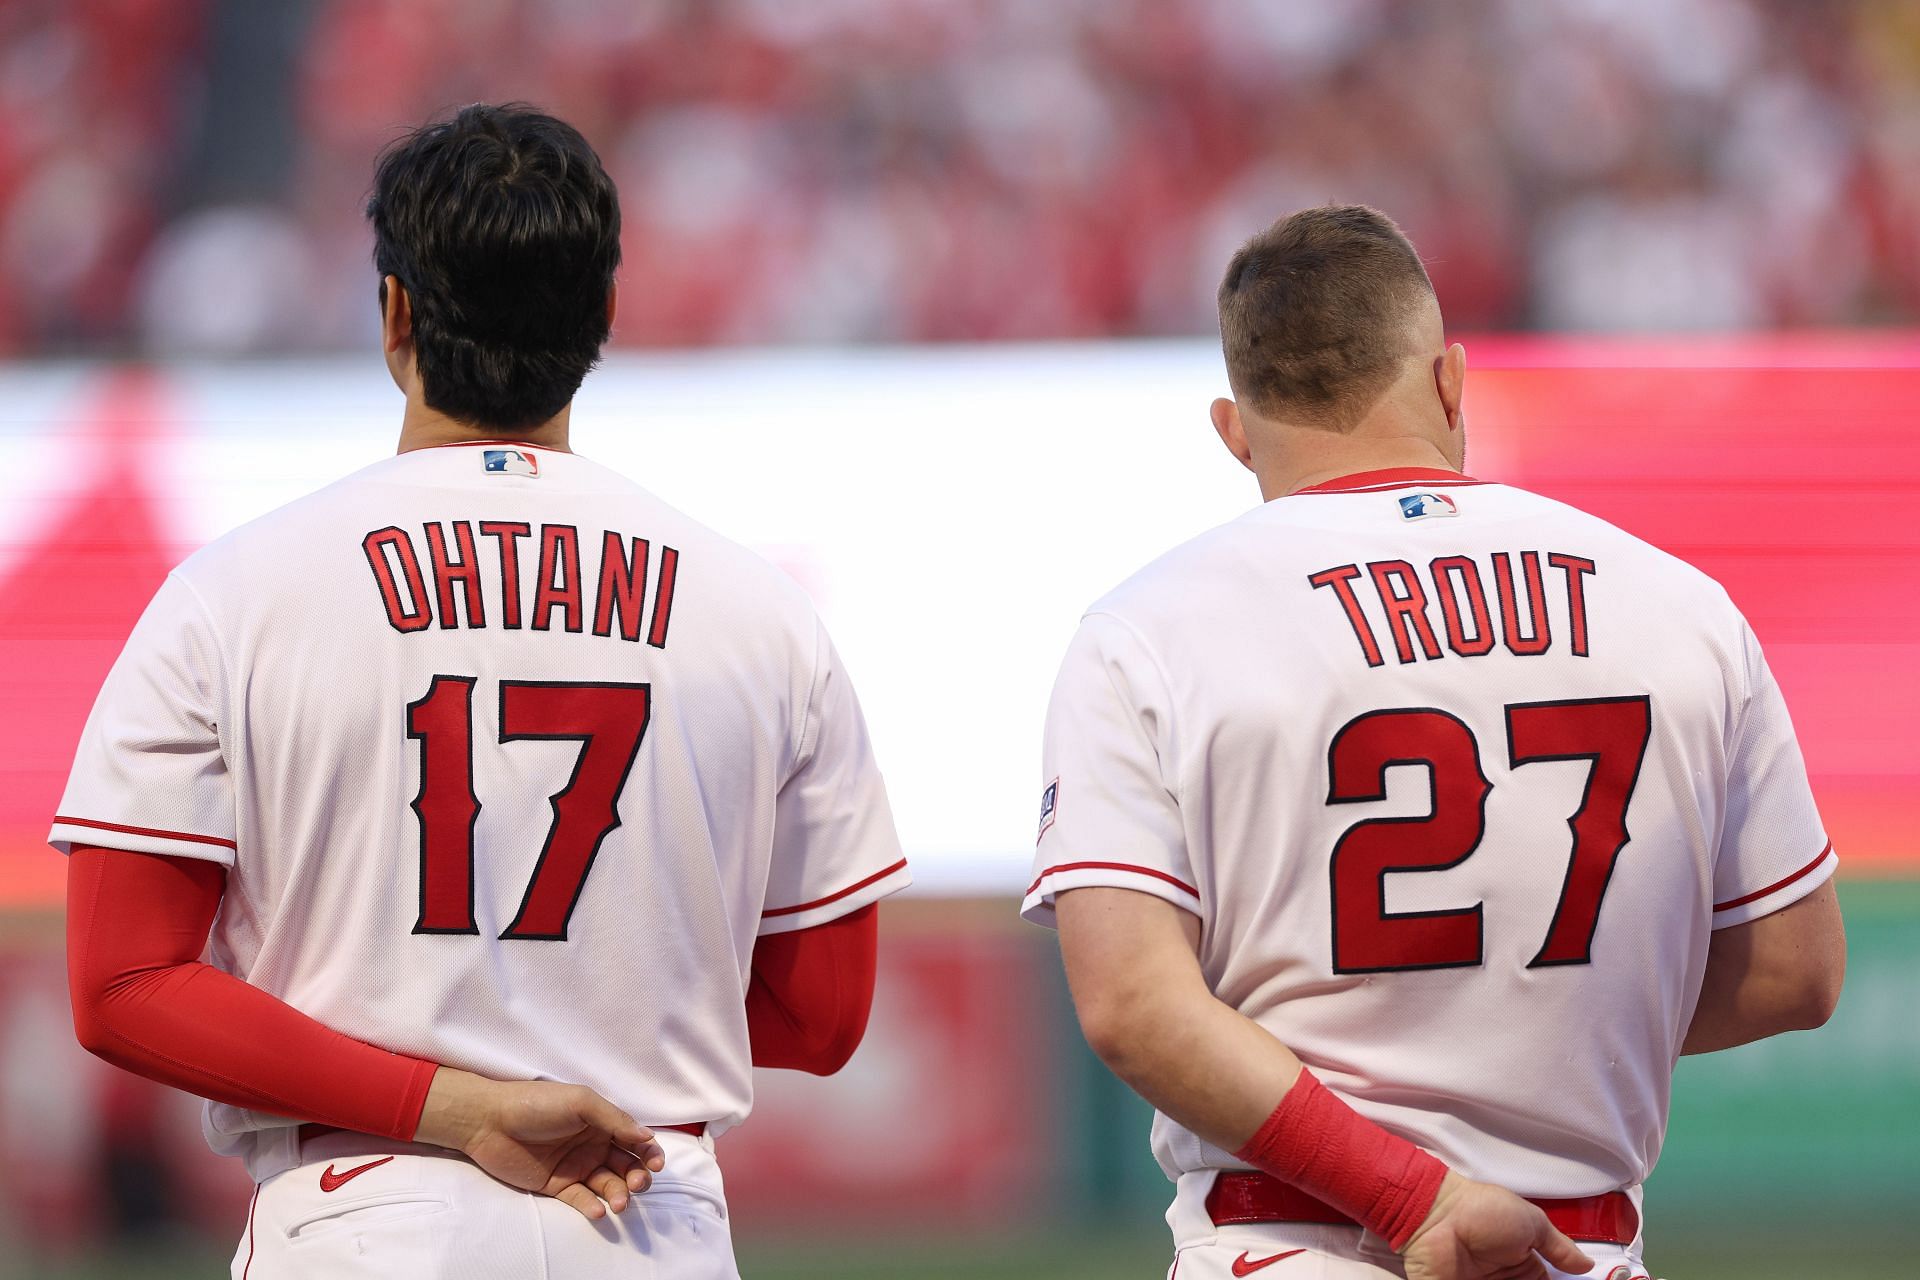 Shohei Ohtani and Mike Trout of the Los Angeles Angels line up for the National Anthem at Angel Stadium of Anaheim